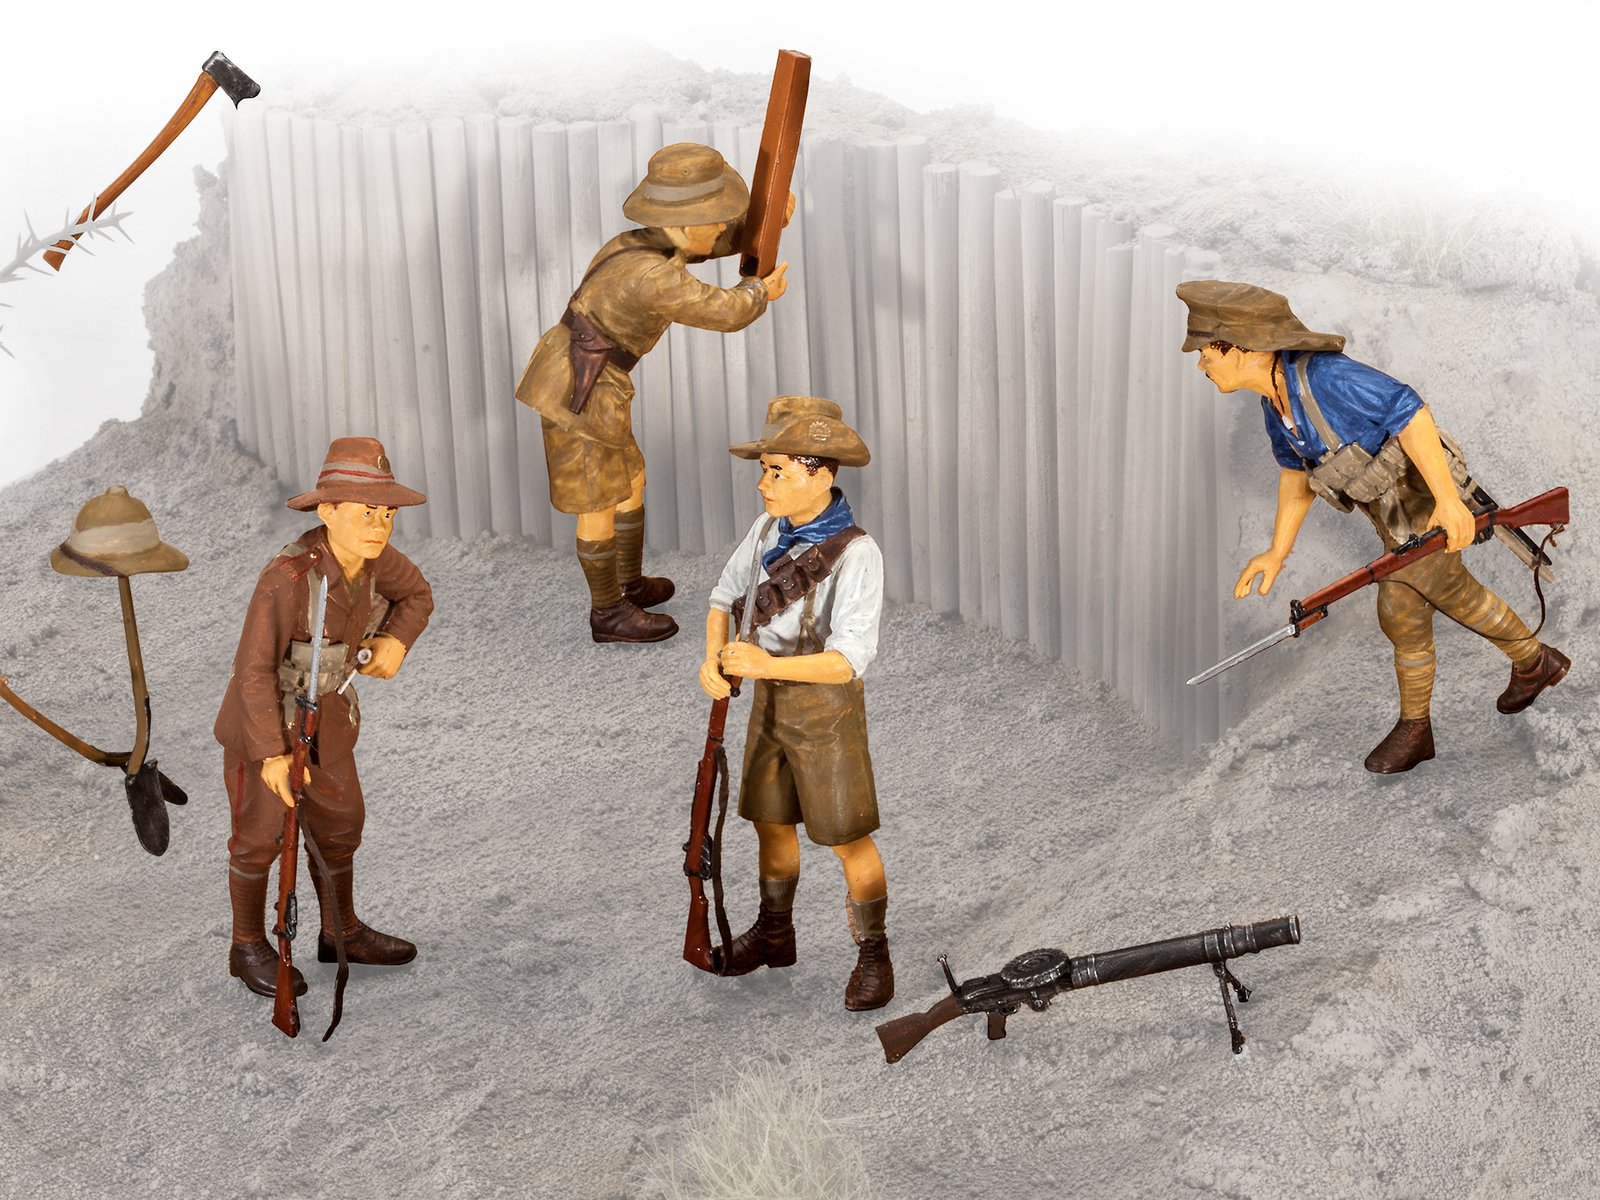 Rvl02618 for sale online Revell Germany 02618 1/35 ANZAC Infantry 1915